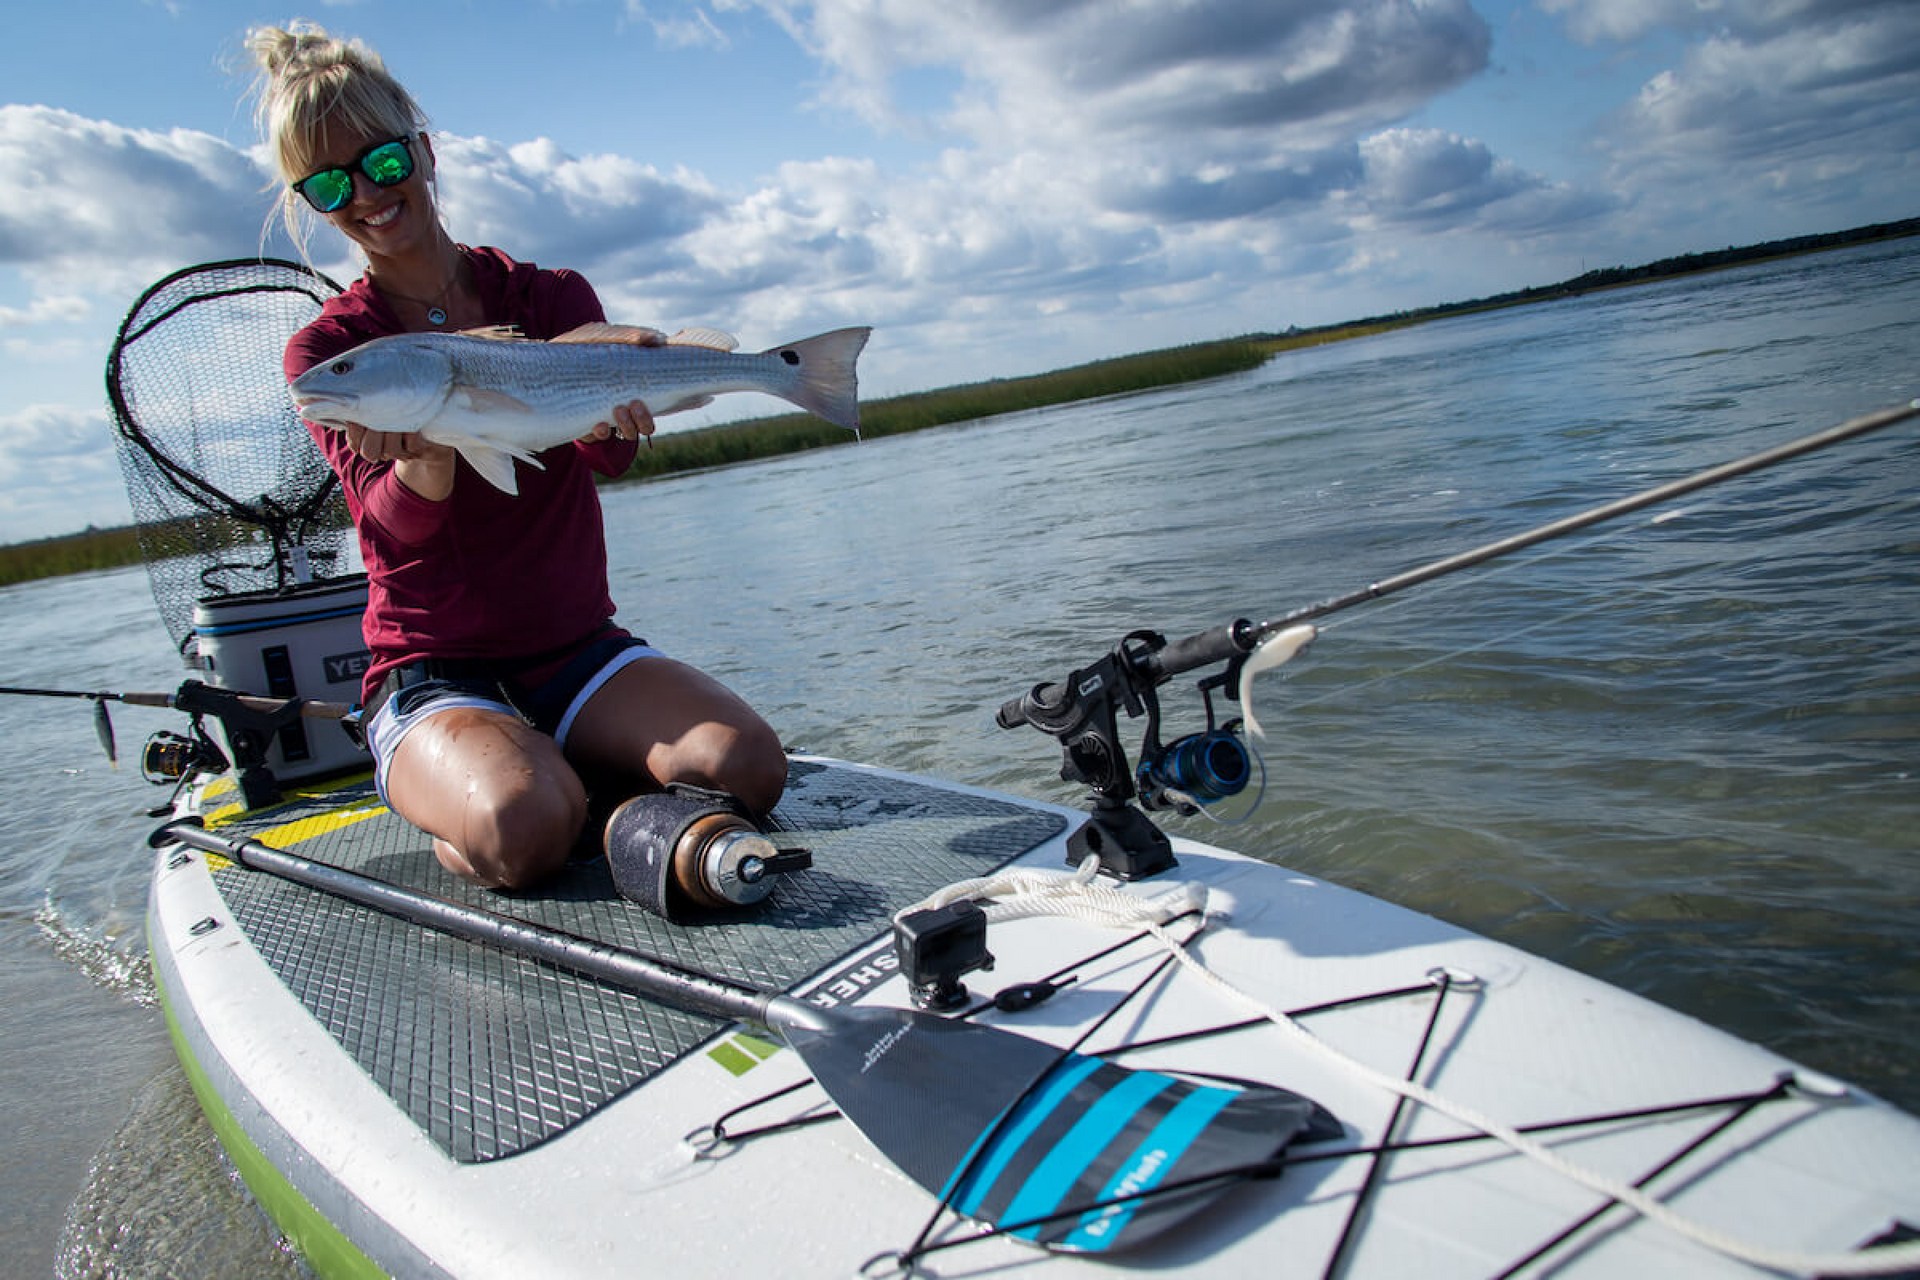 How to Set up your Badfisher for SUP Fishing